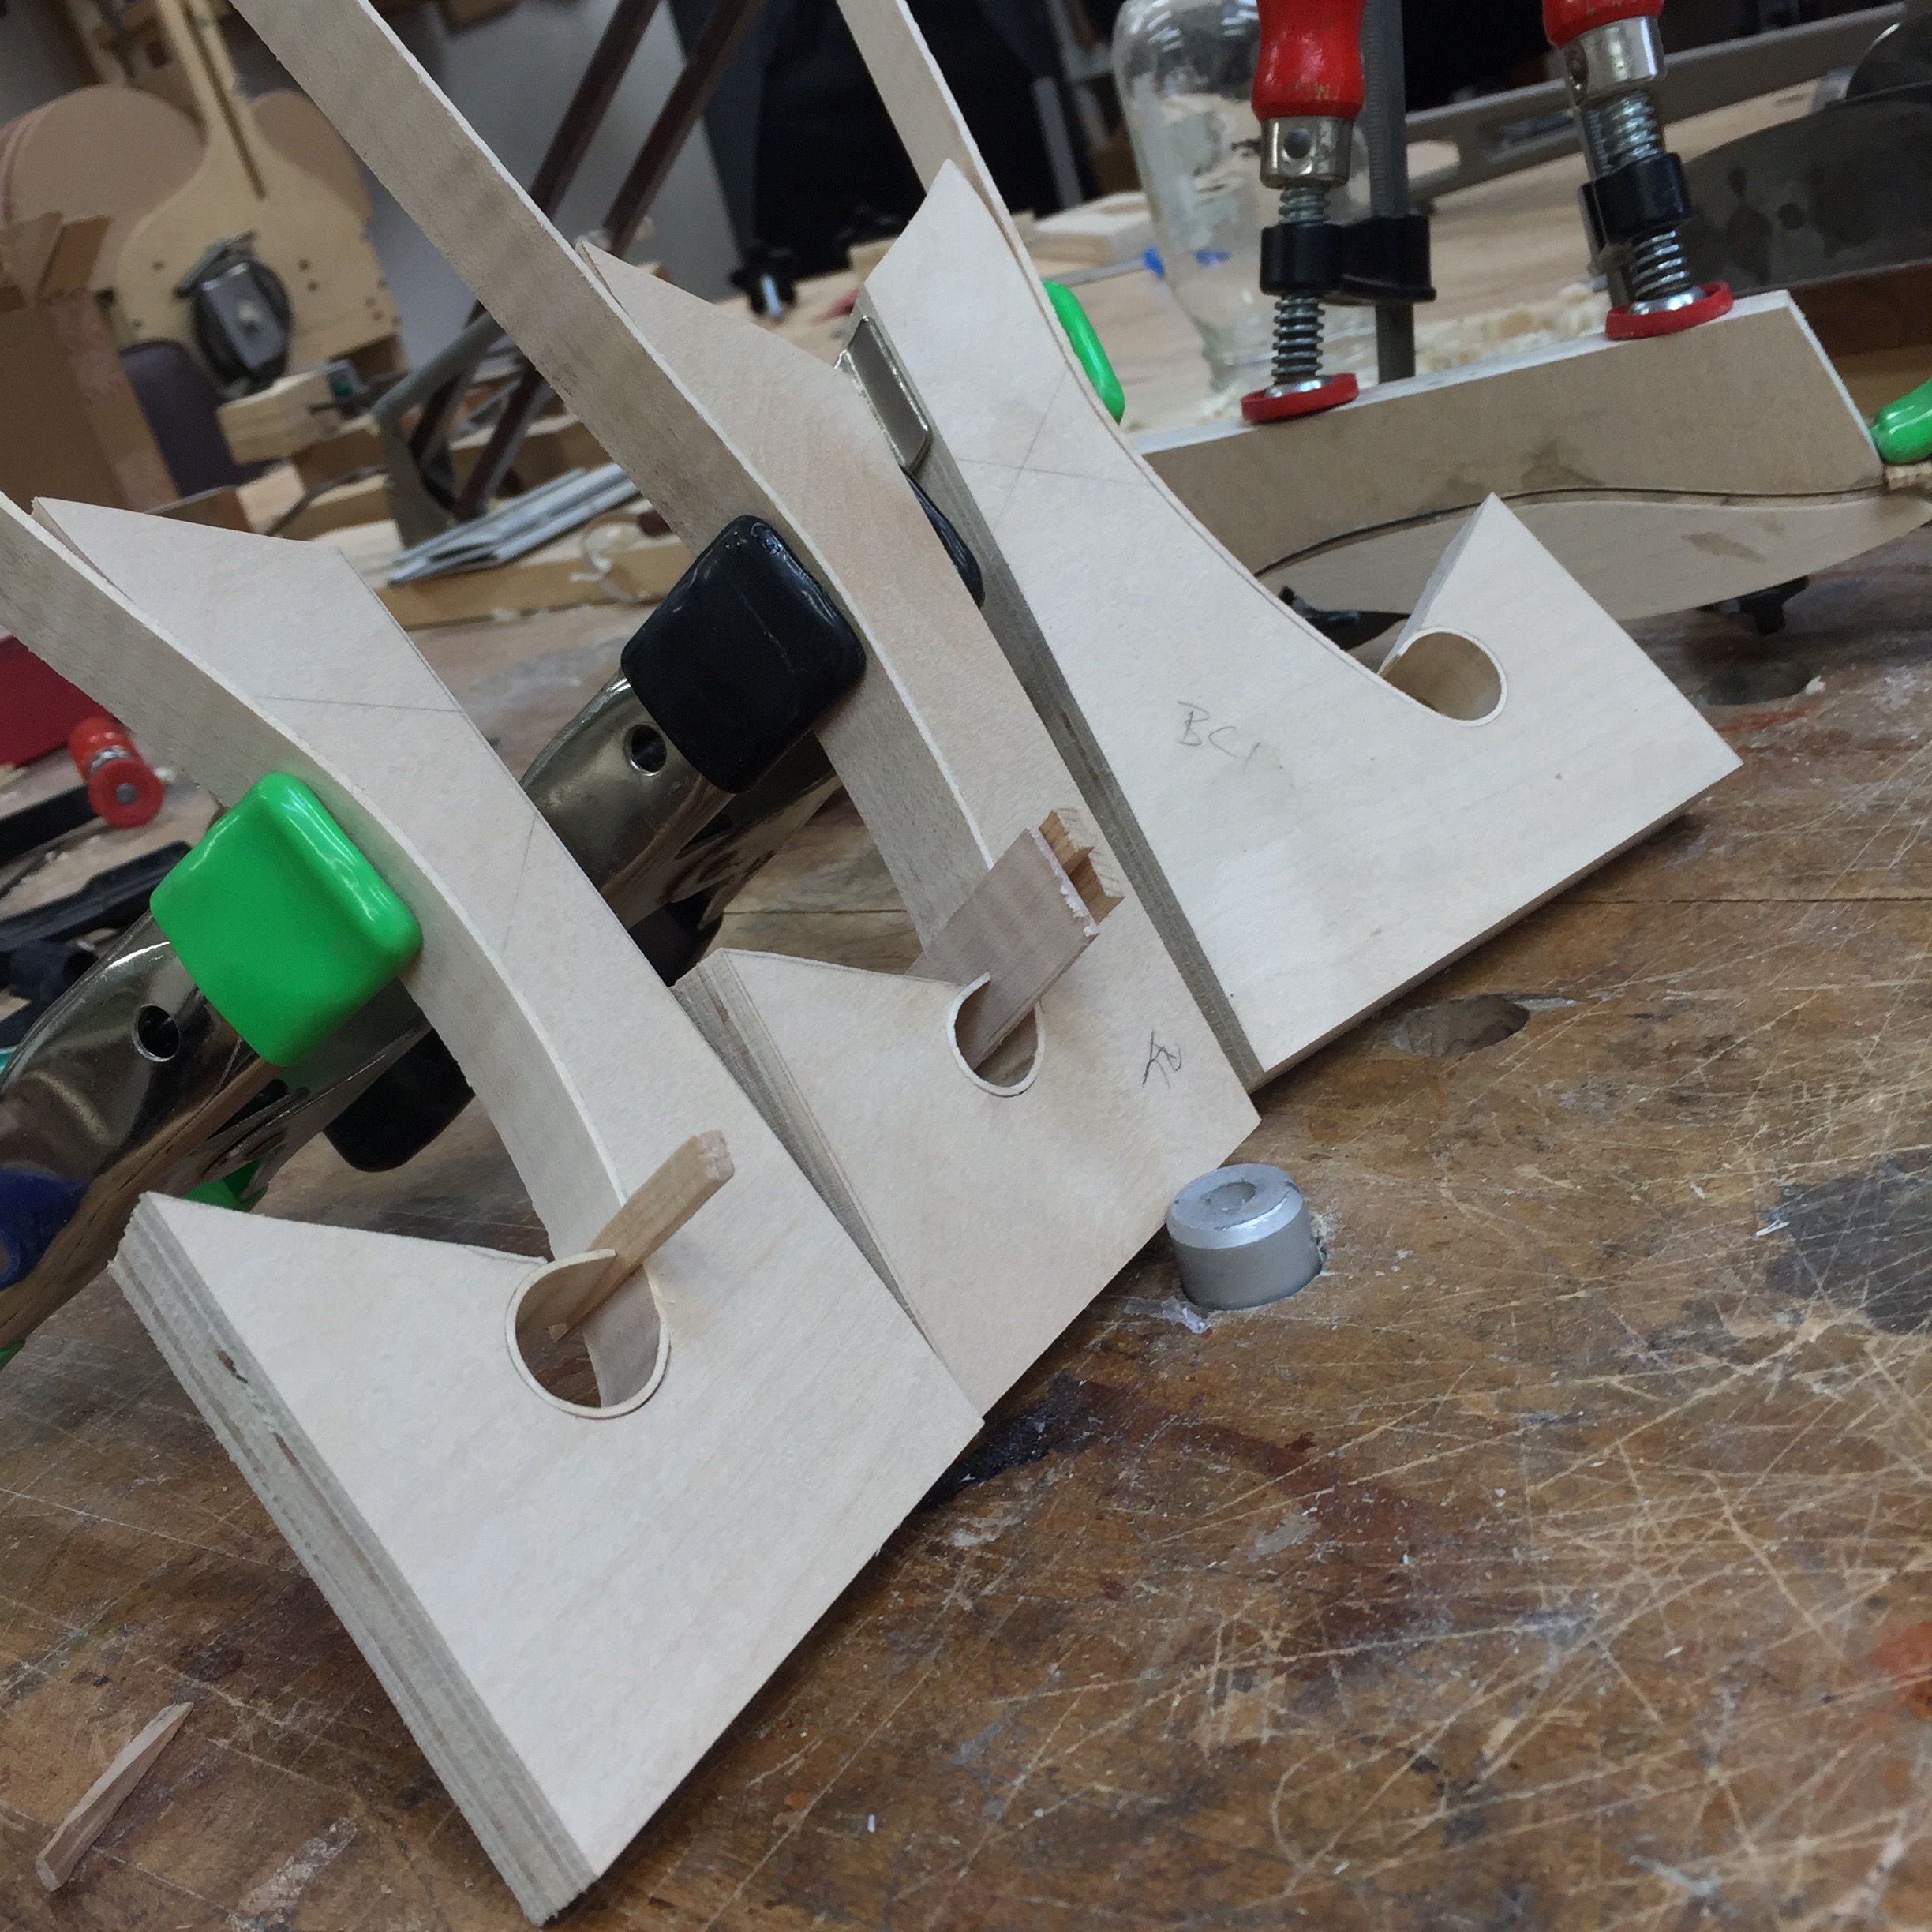 Maple bindings in mold with wedge for tightness